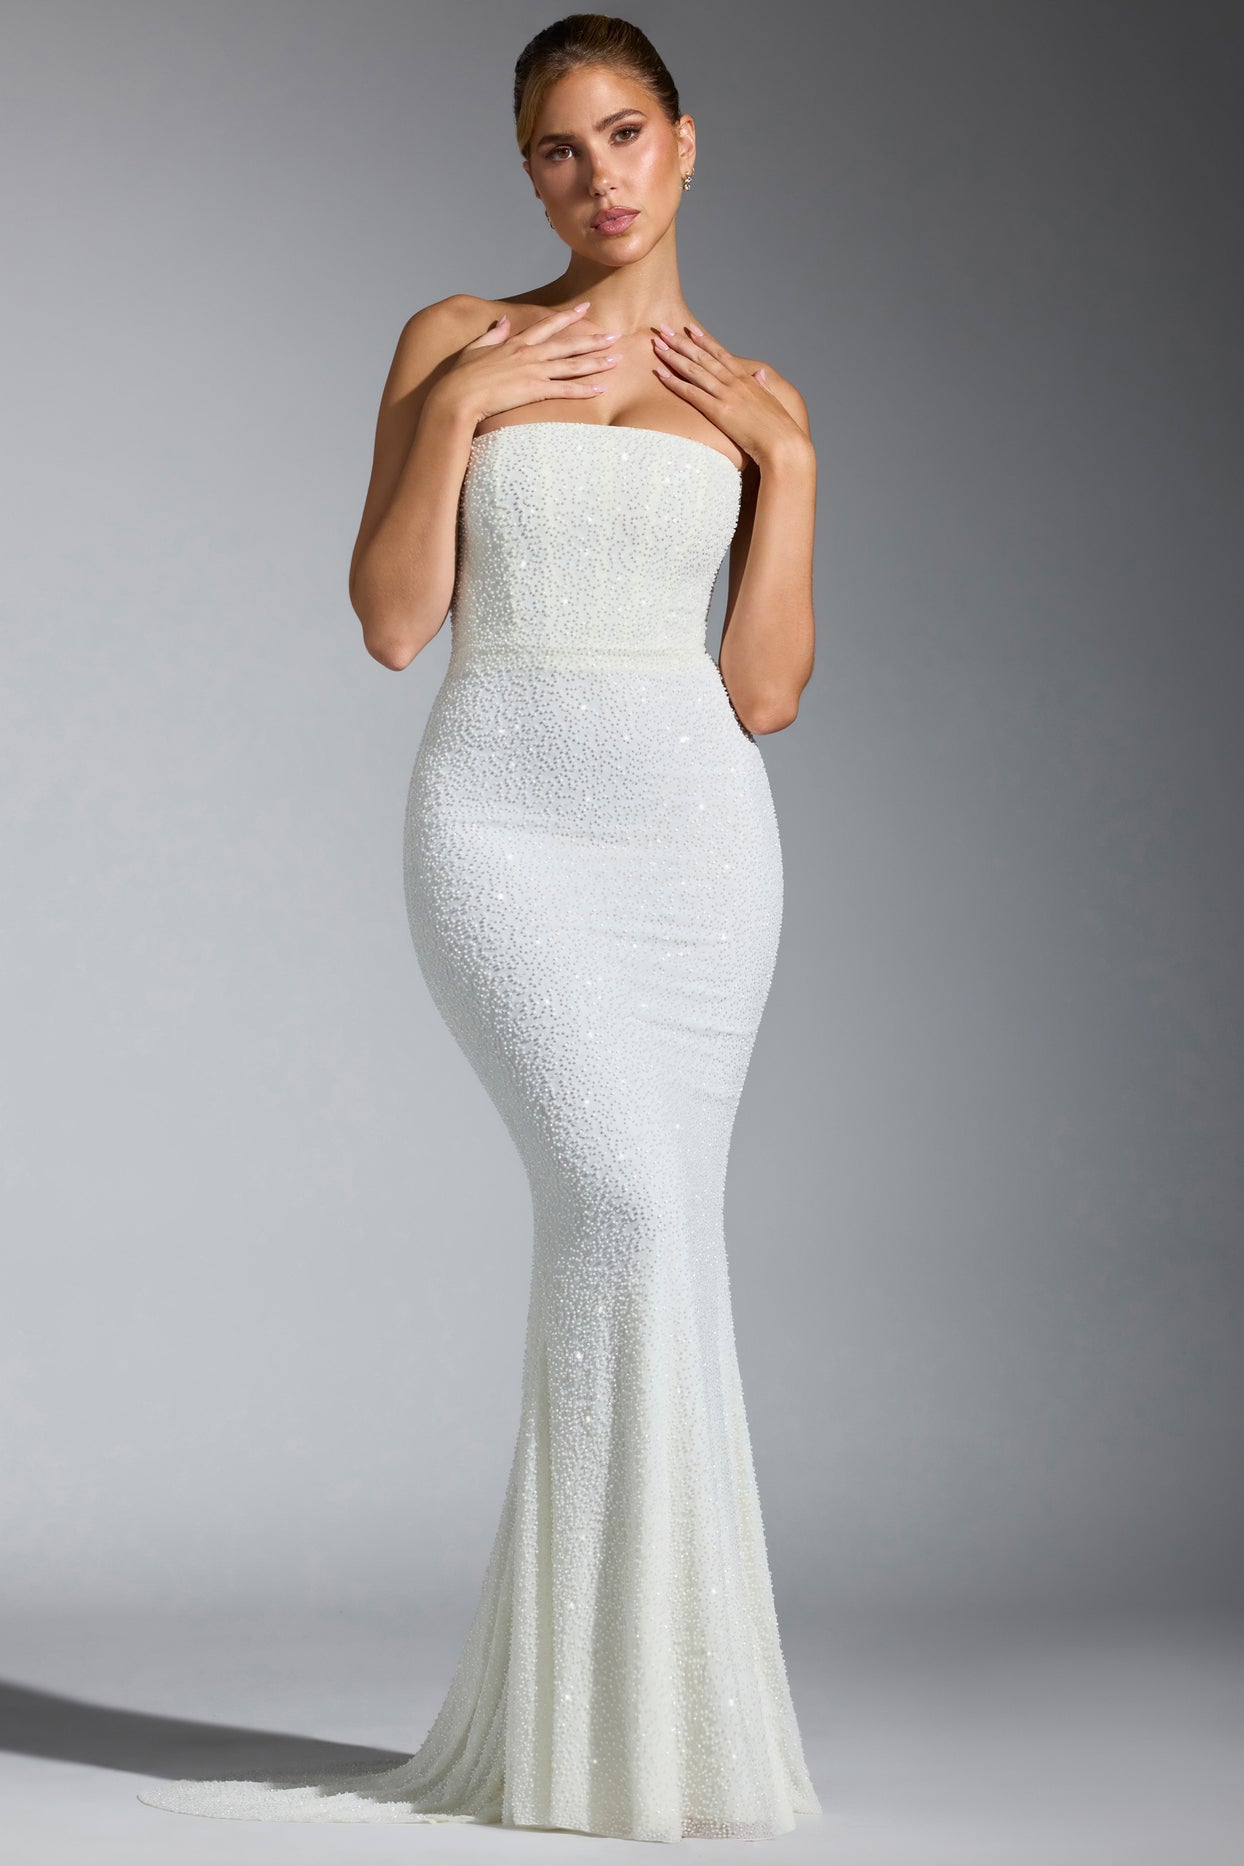 Embellished Corset Gown in White